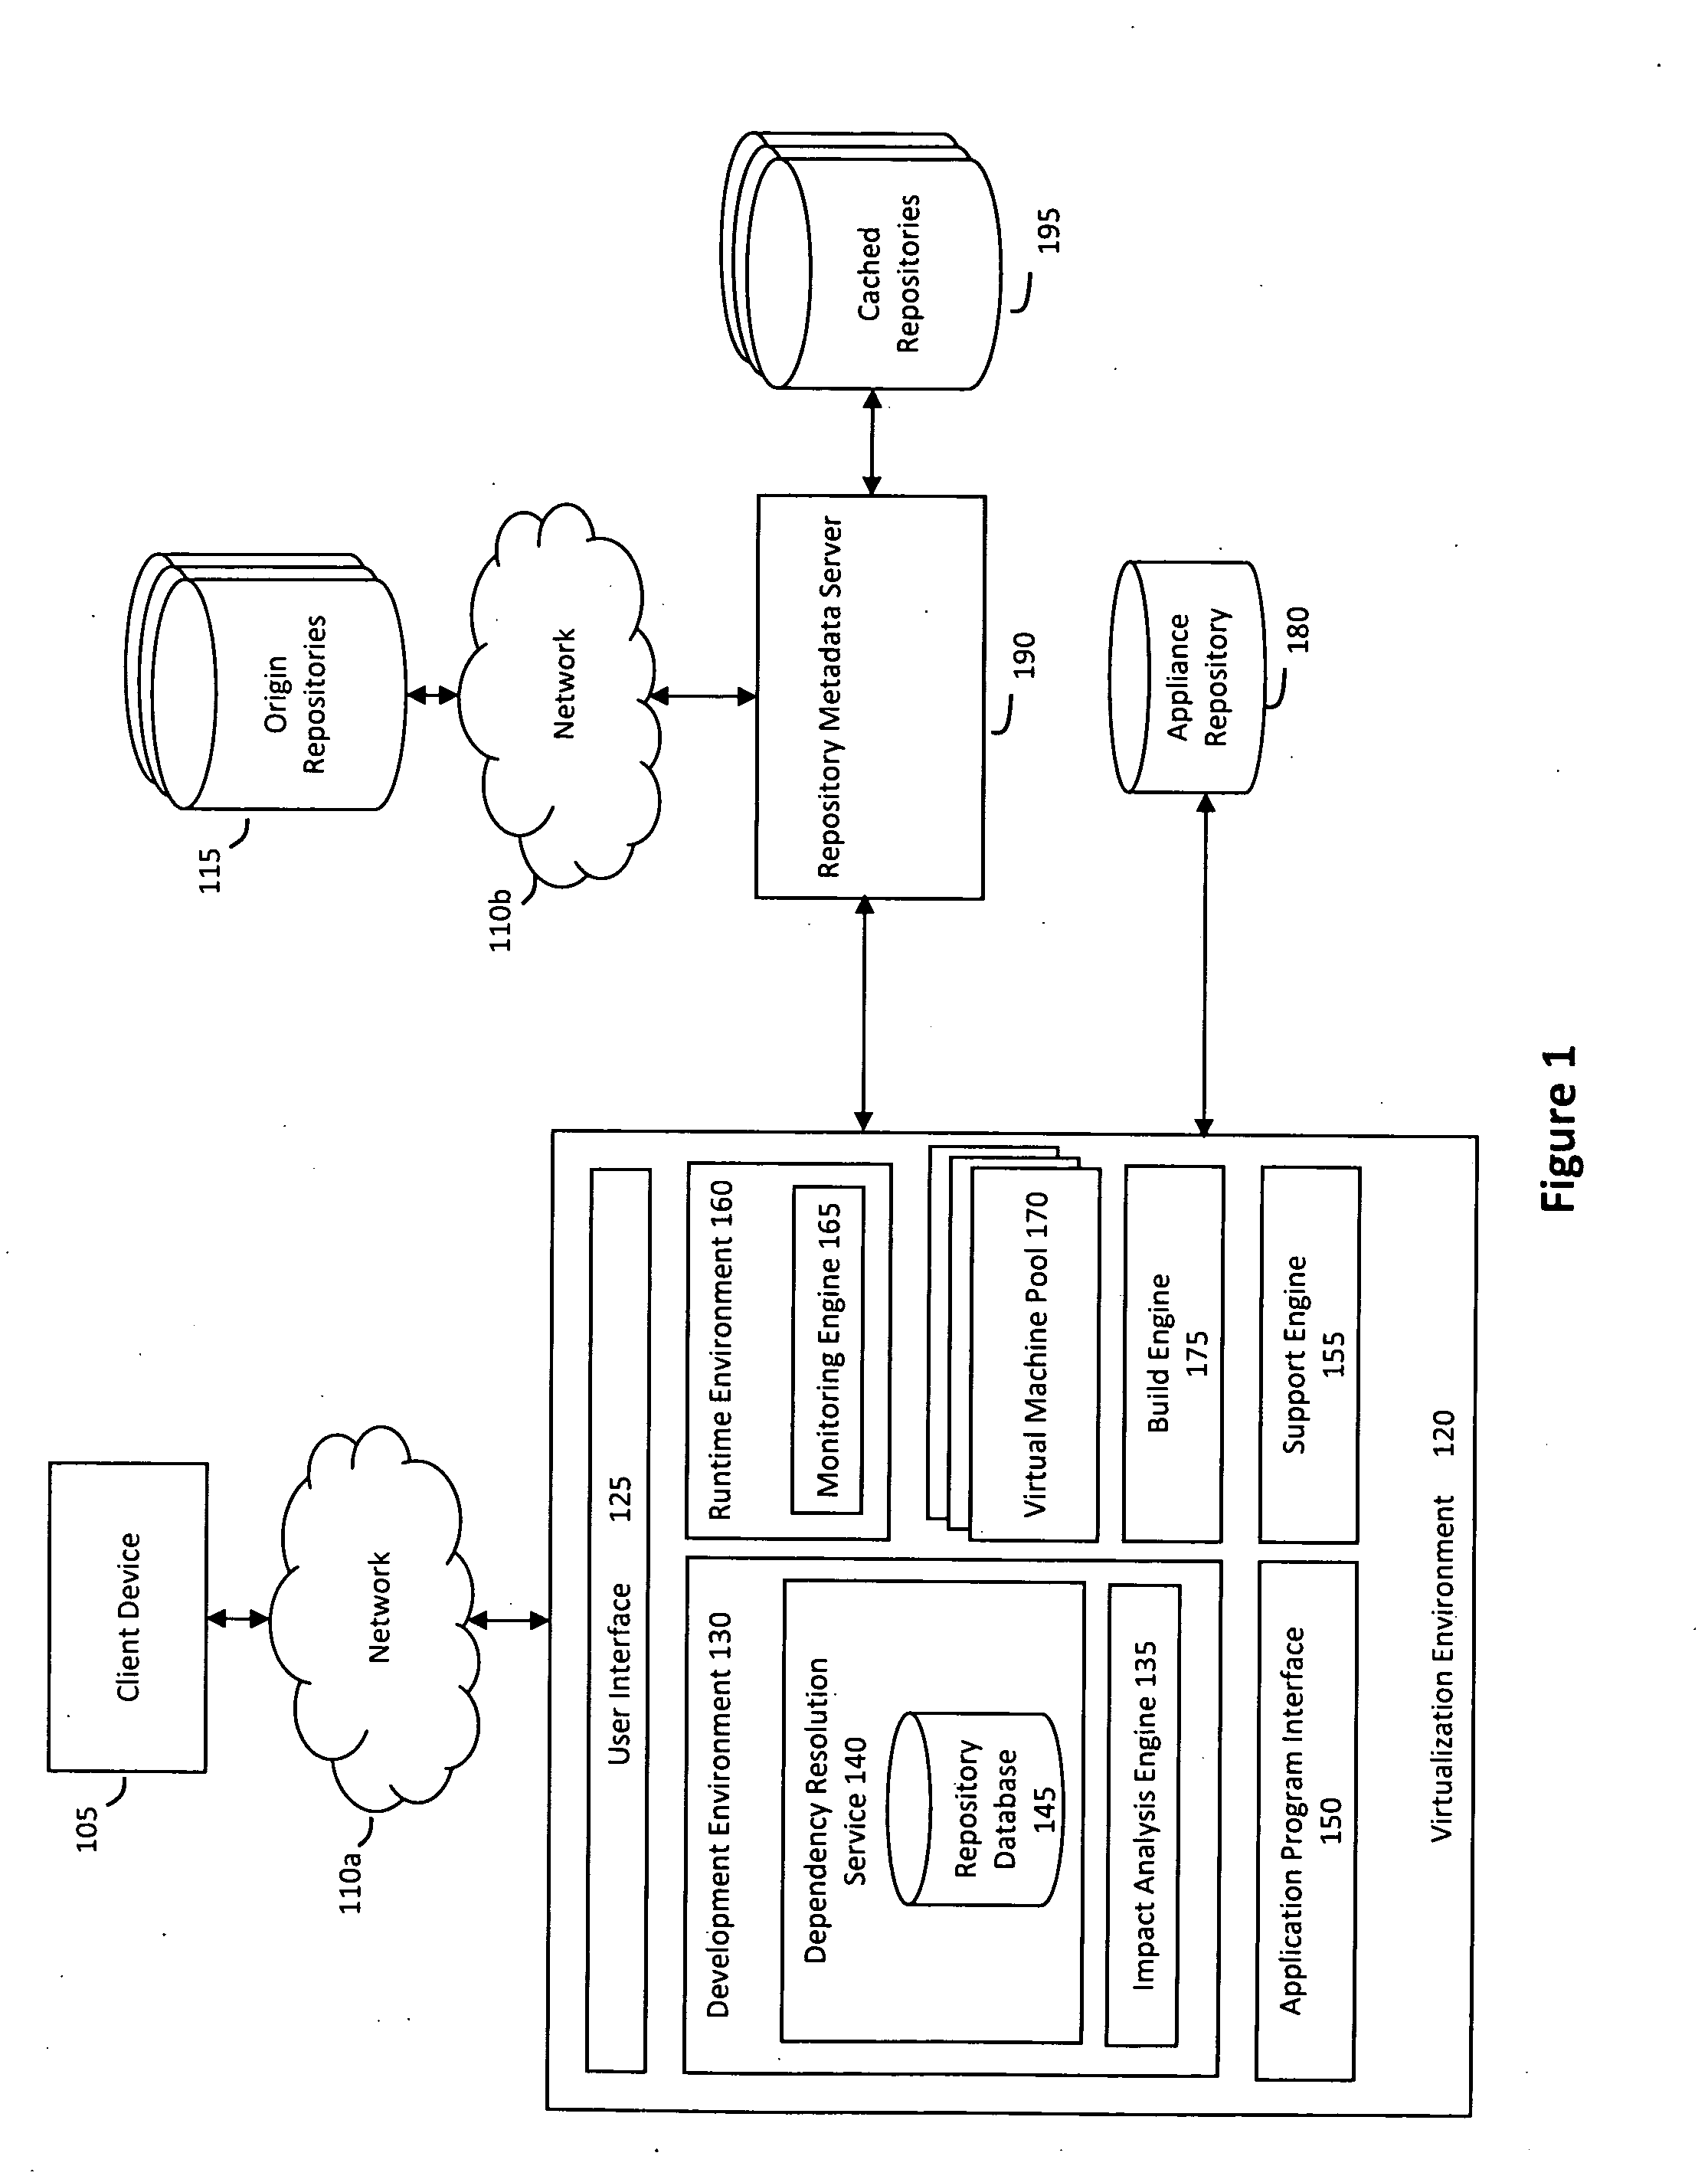 System and method for supporting a virtual appliance